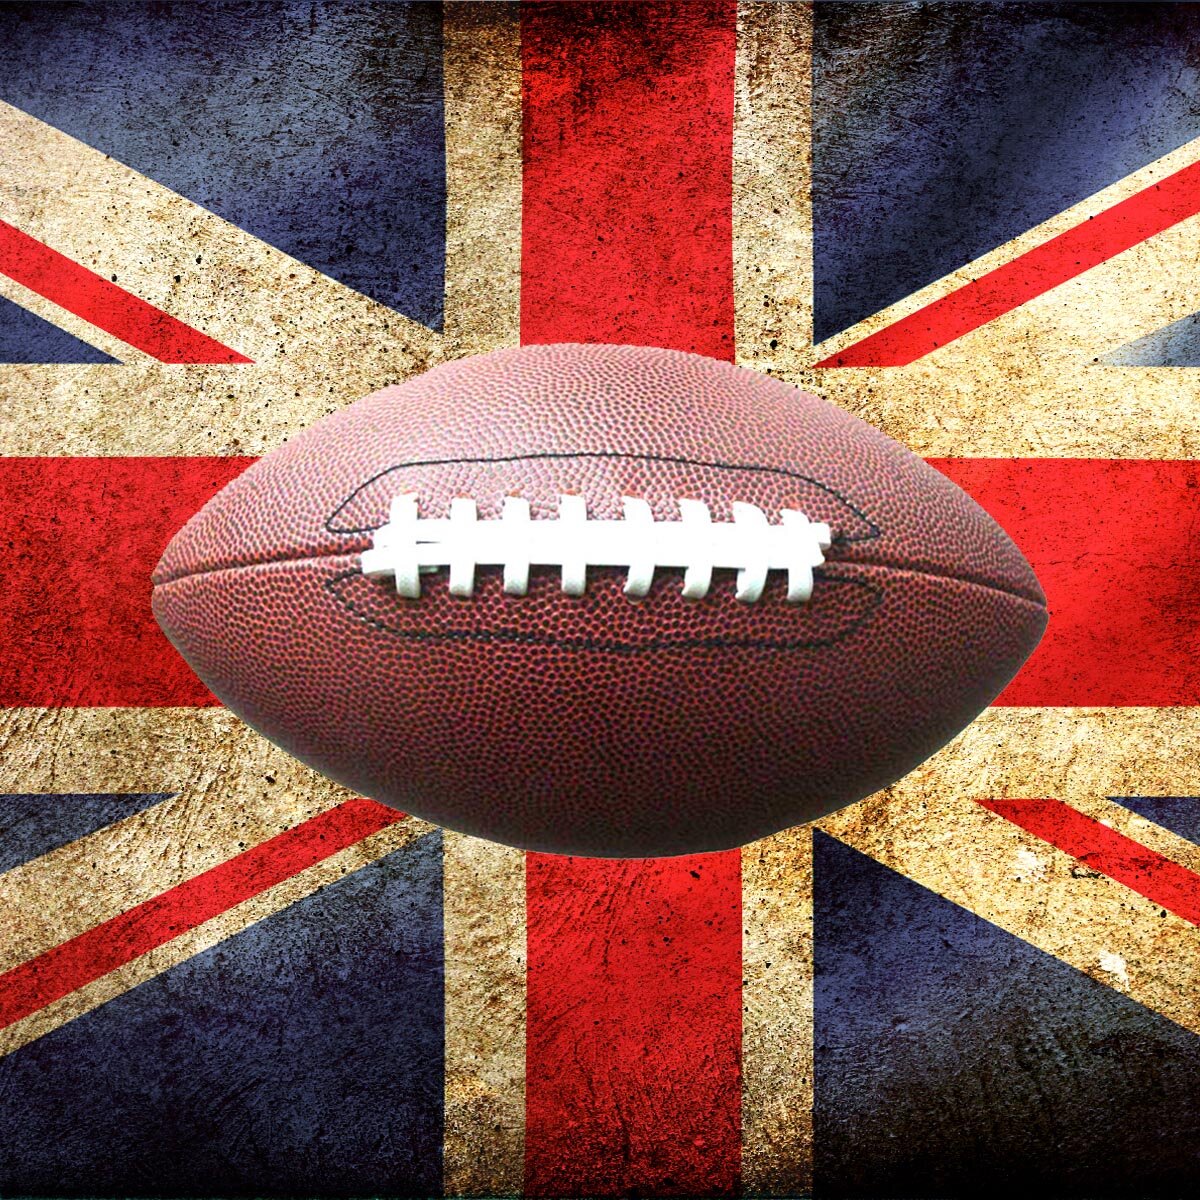 A British guide to the American pastime of Throwball.